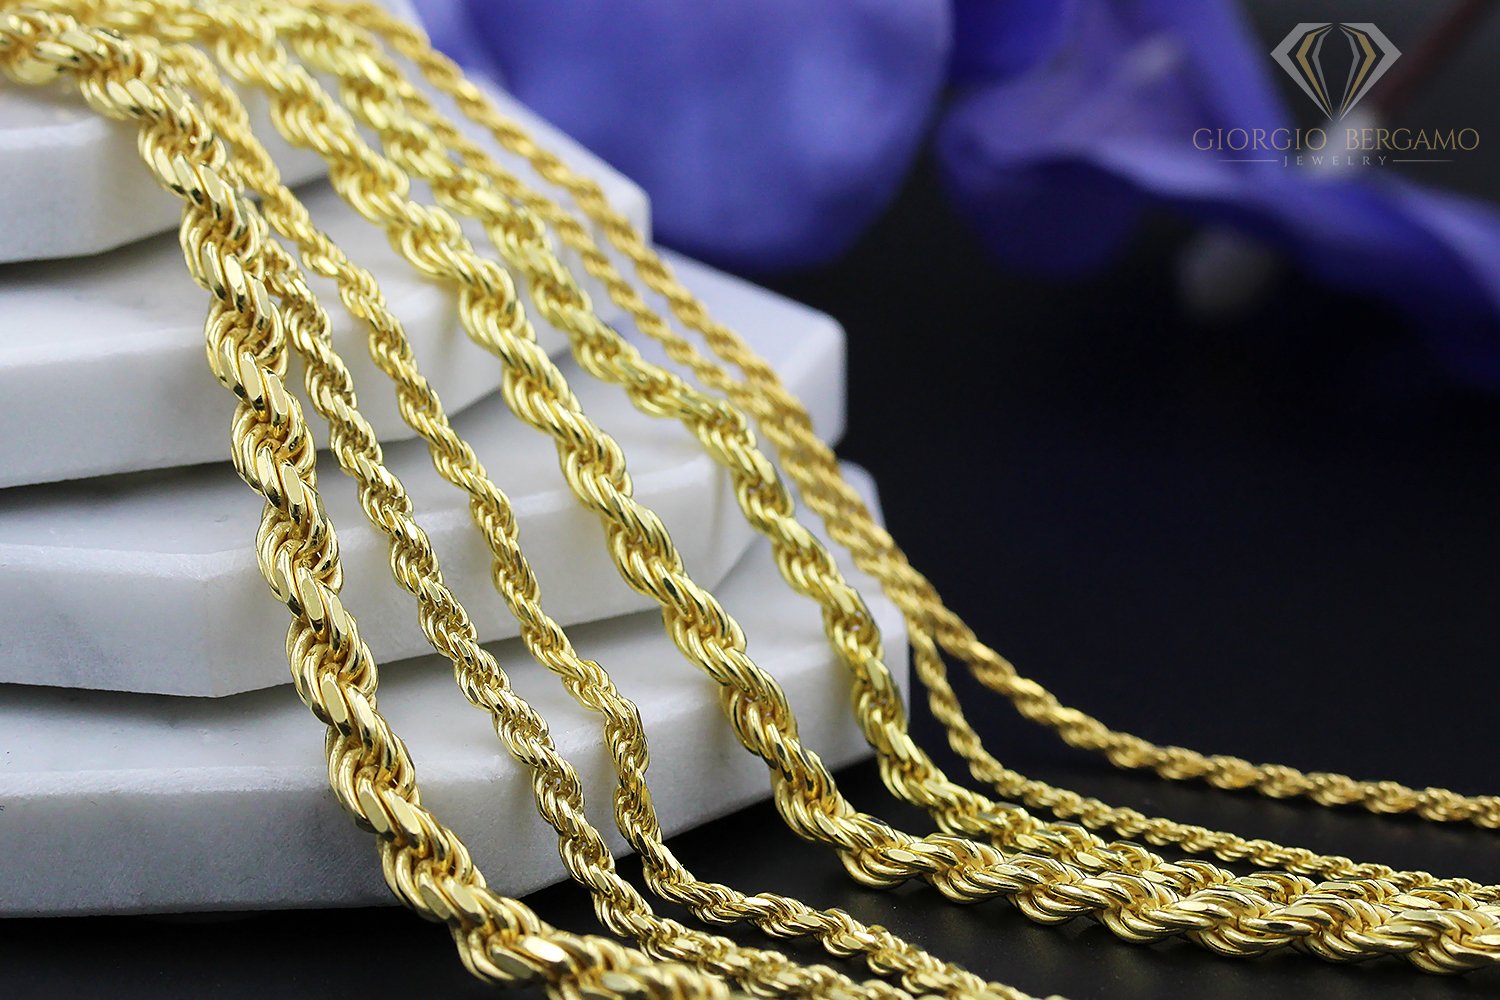 14K Yellow Gold 2.5mm Solid Rope Diamond Cut Chain